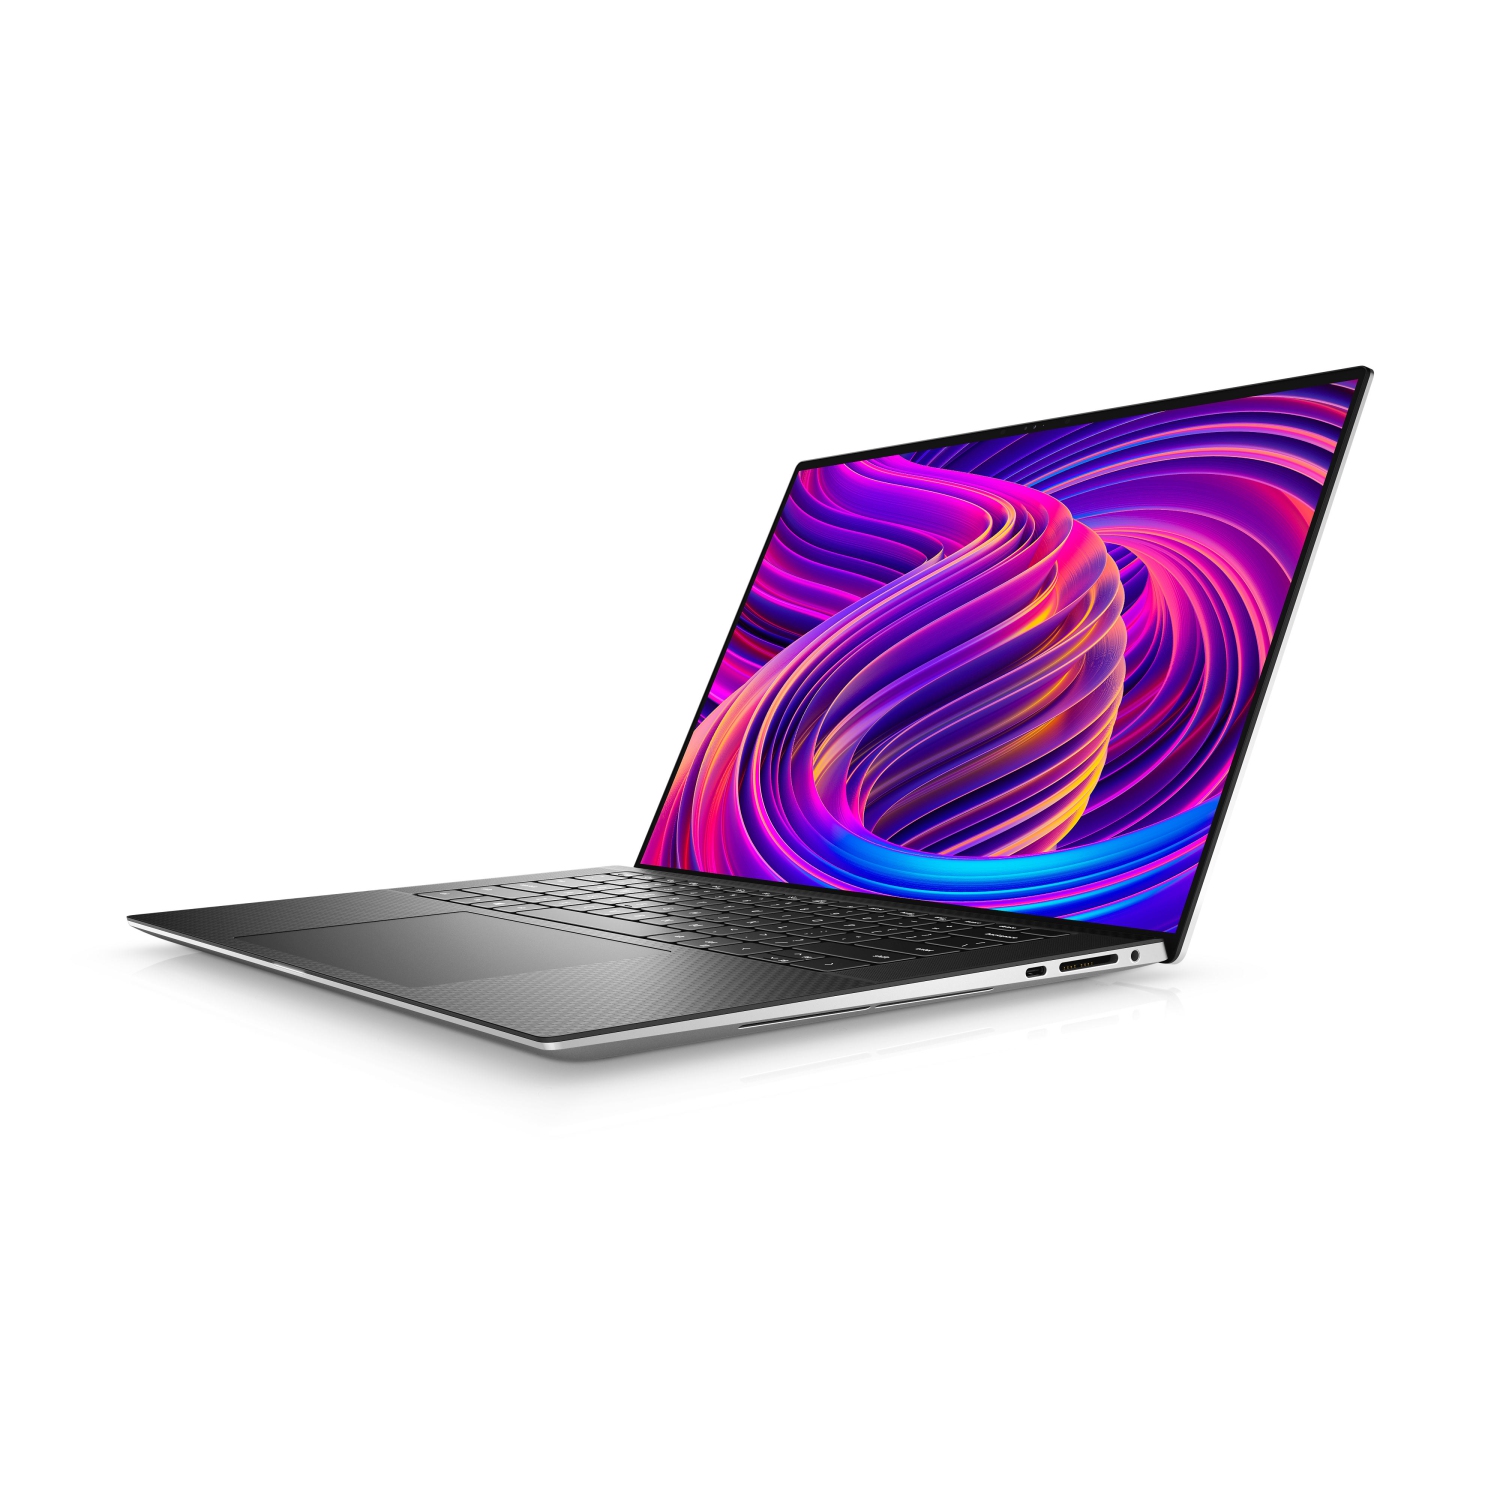 Refurbished (Excellent) - Dell XPS 15 9510 Laptop (2021) | 15.6" 4K Touch | Core i9 - 1TB SSD - 8GB RAM - 3050 Ti | 8 Cores @ 4.9 GHz - 11th Gen CPU Certified Refurbished